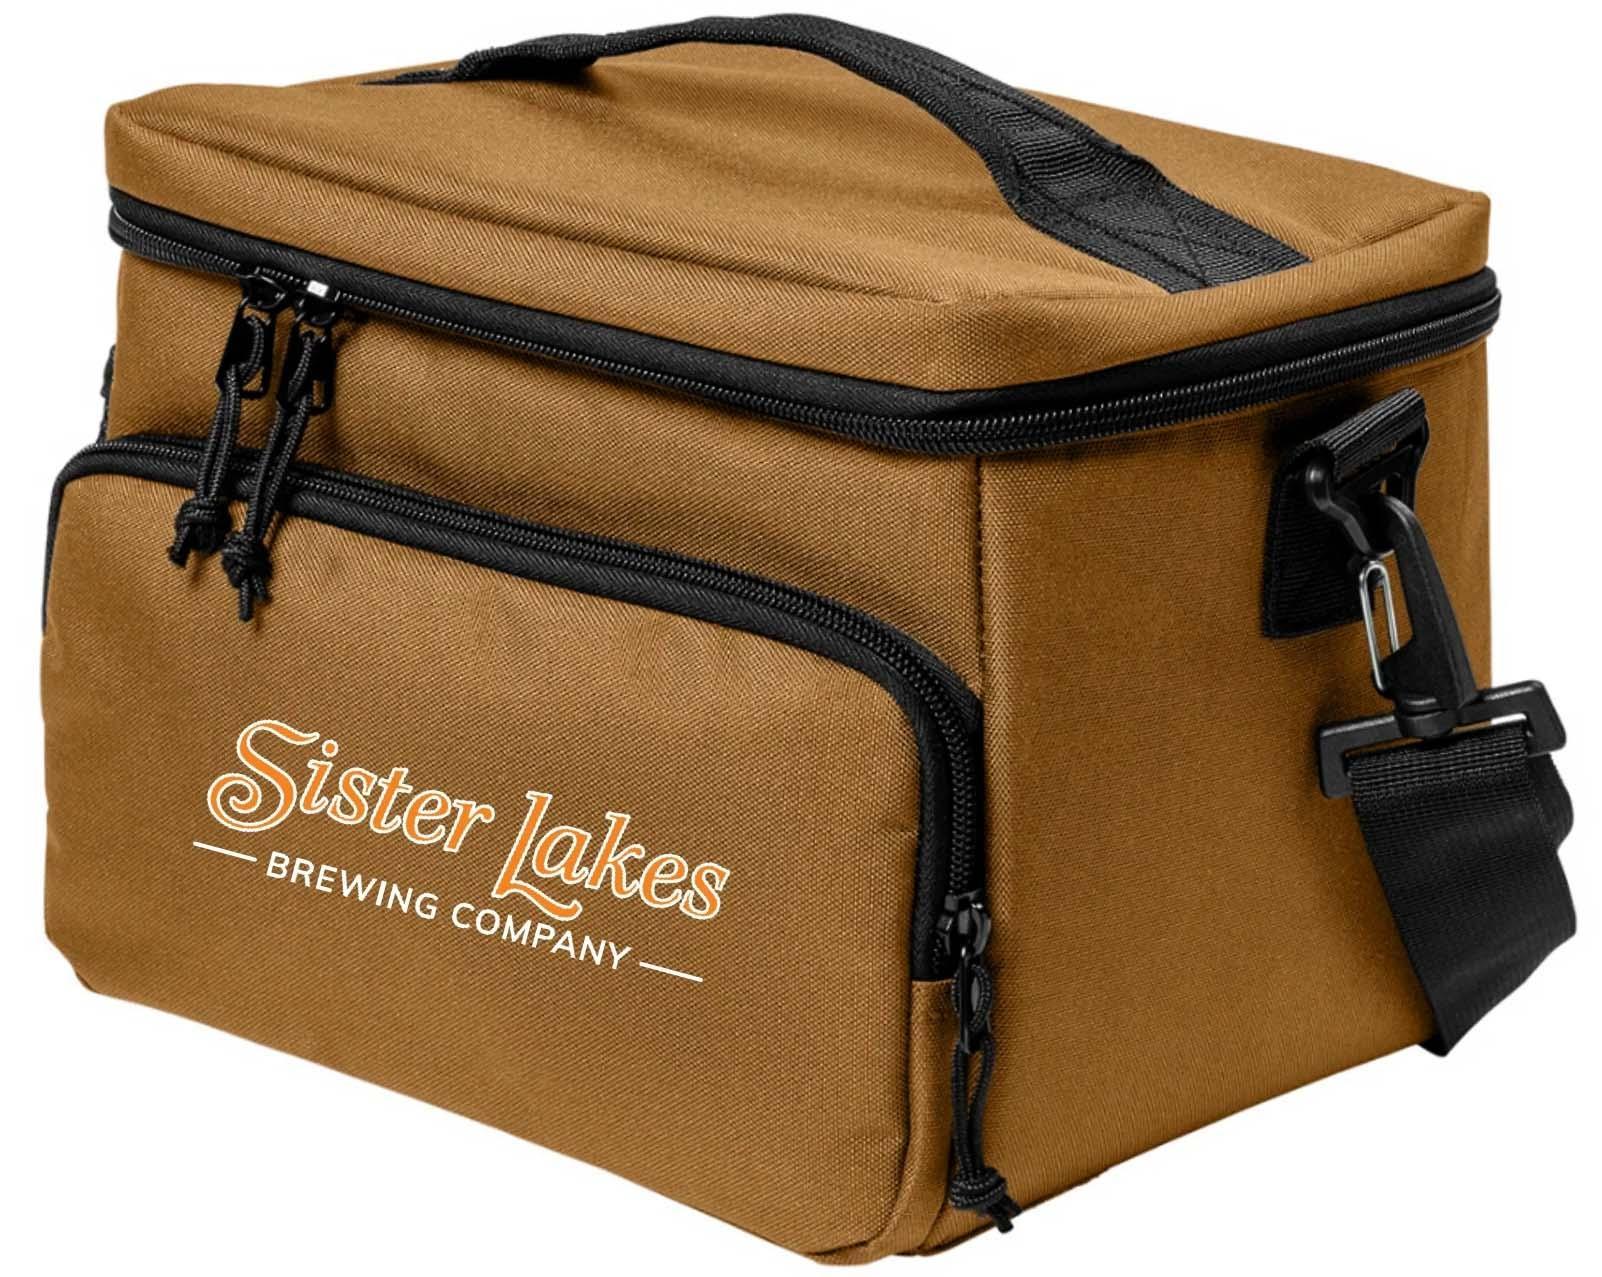 A Sister Lakes cooler